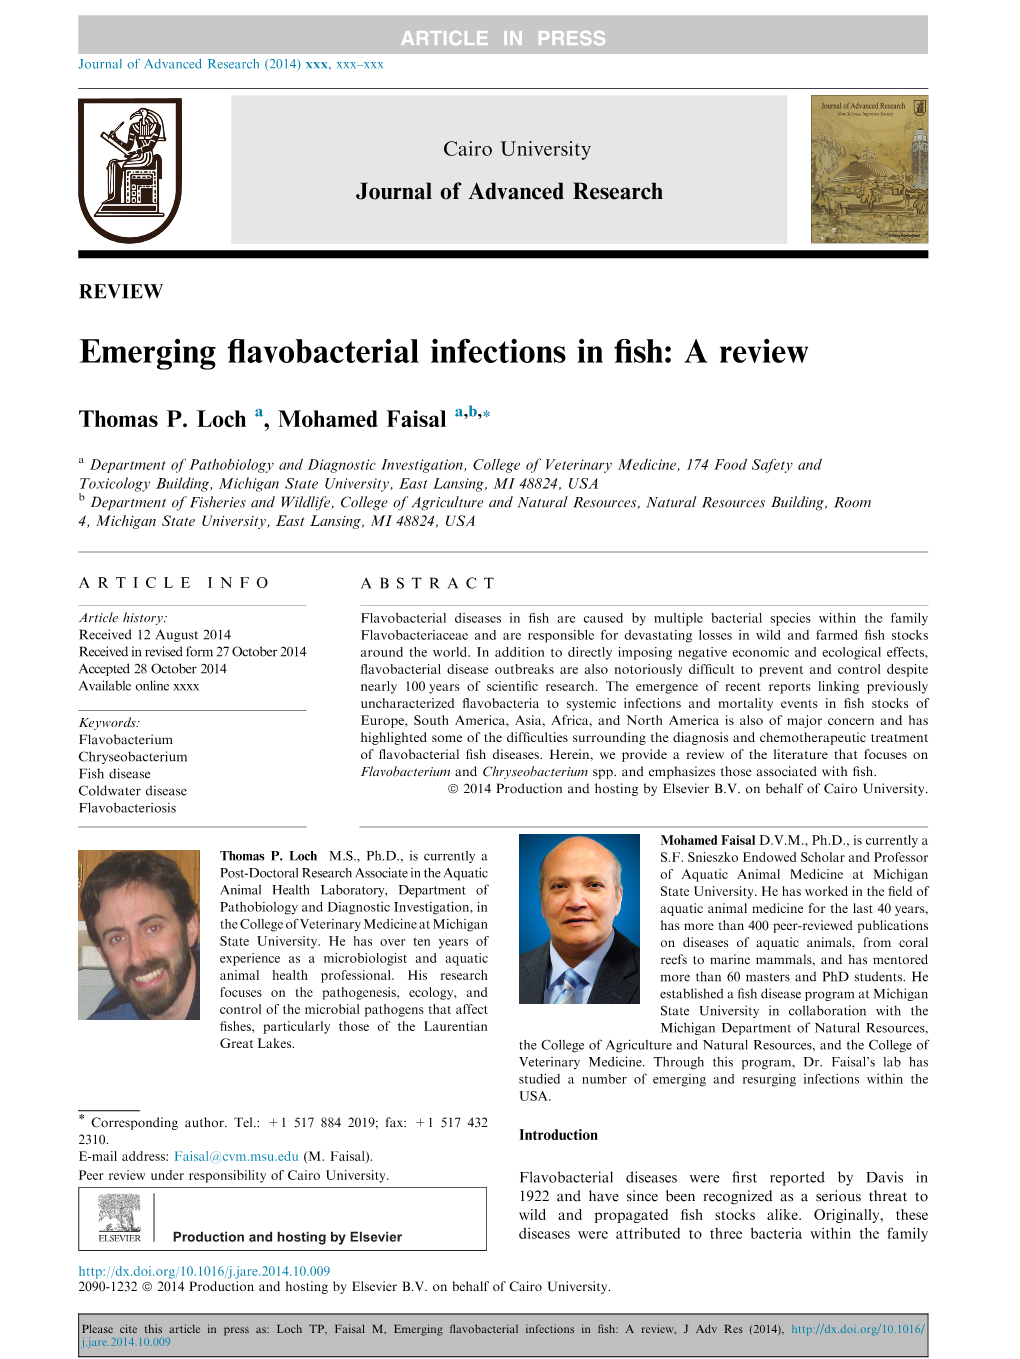 Emerging Flavobacterial Infections in Fish